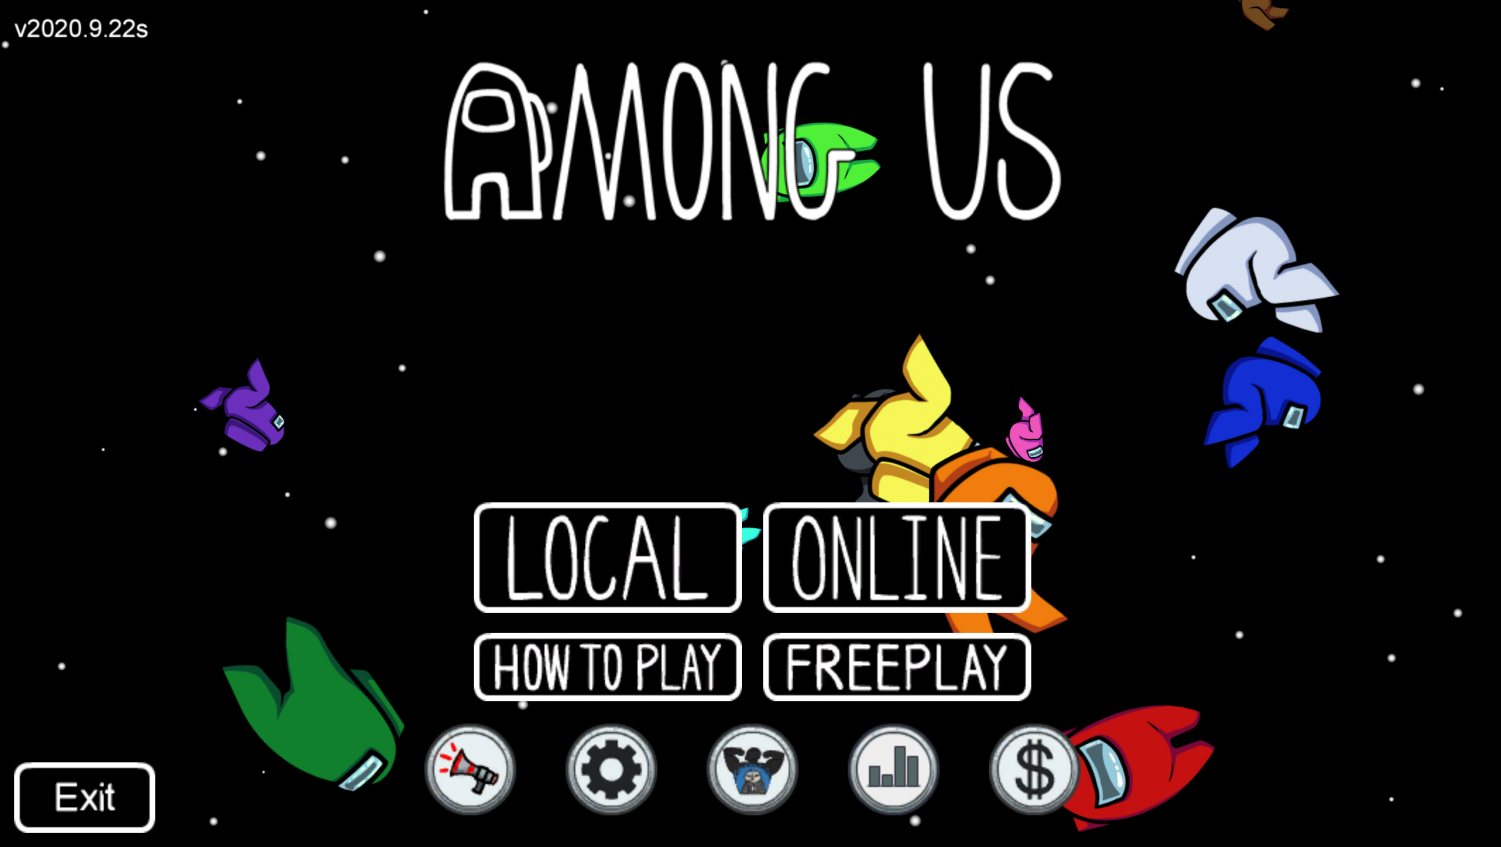 Among Us Game Play Online For Free